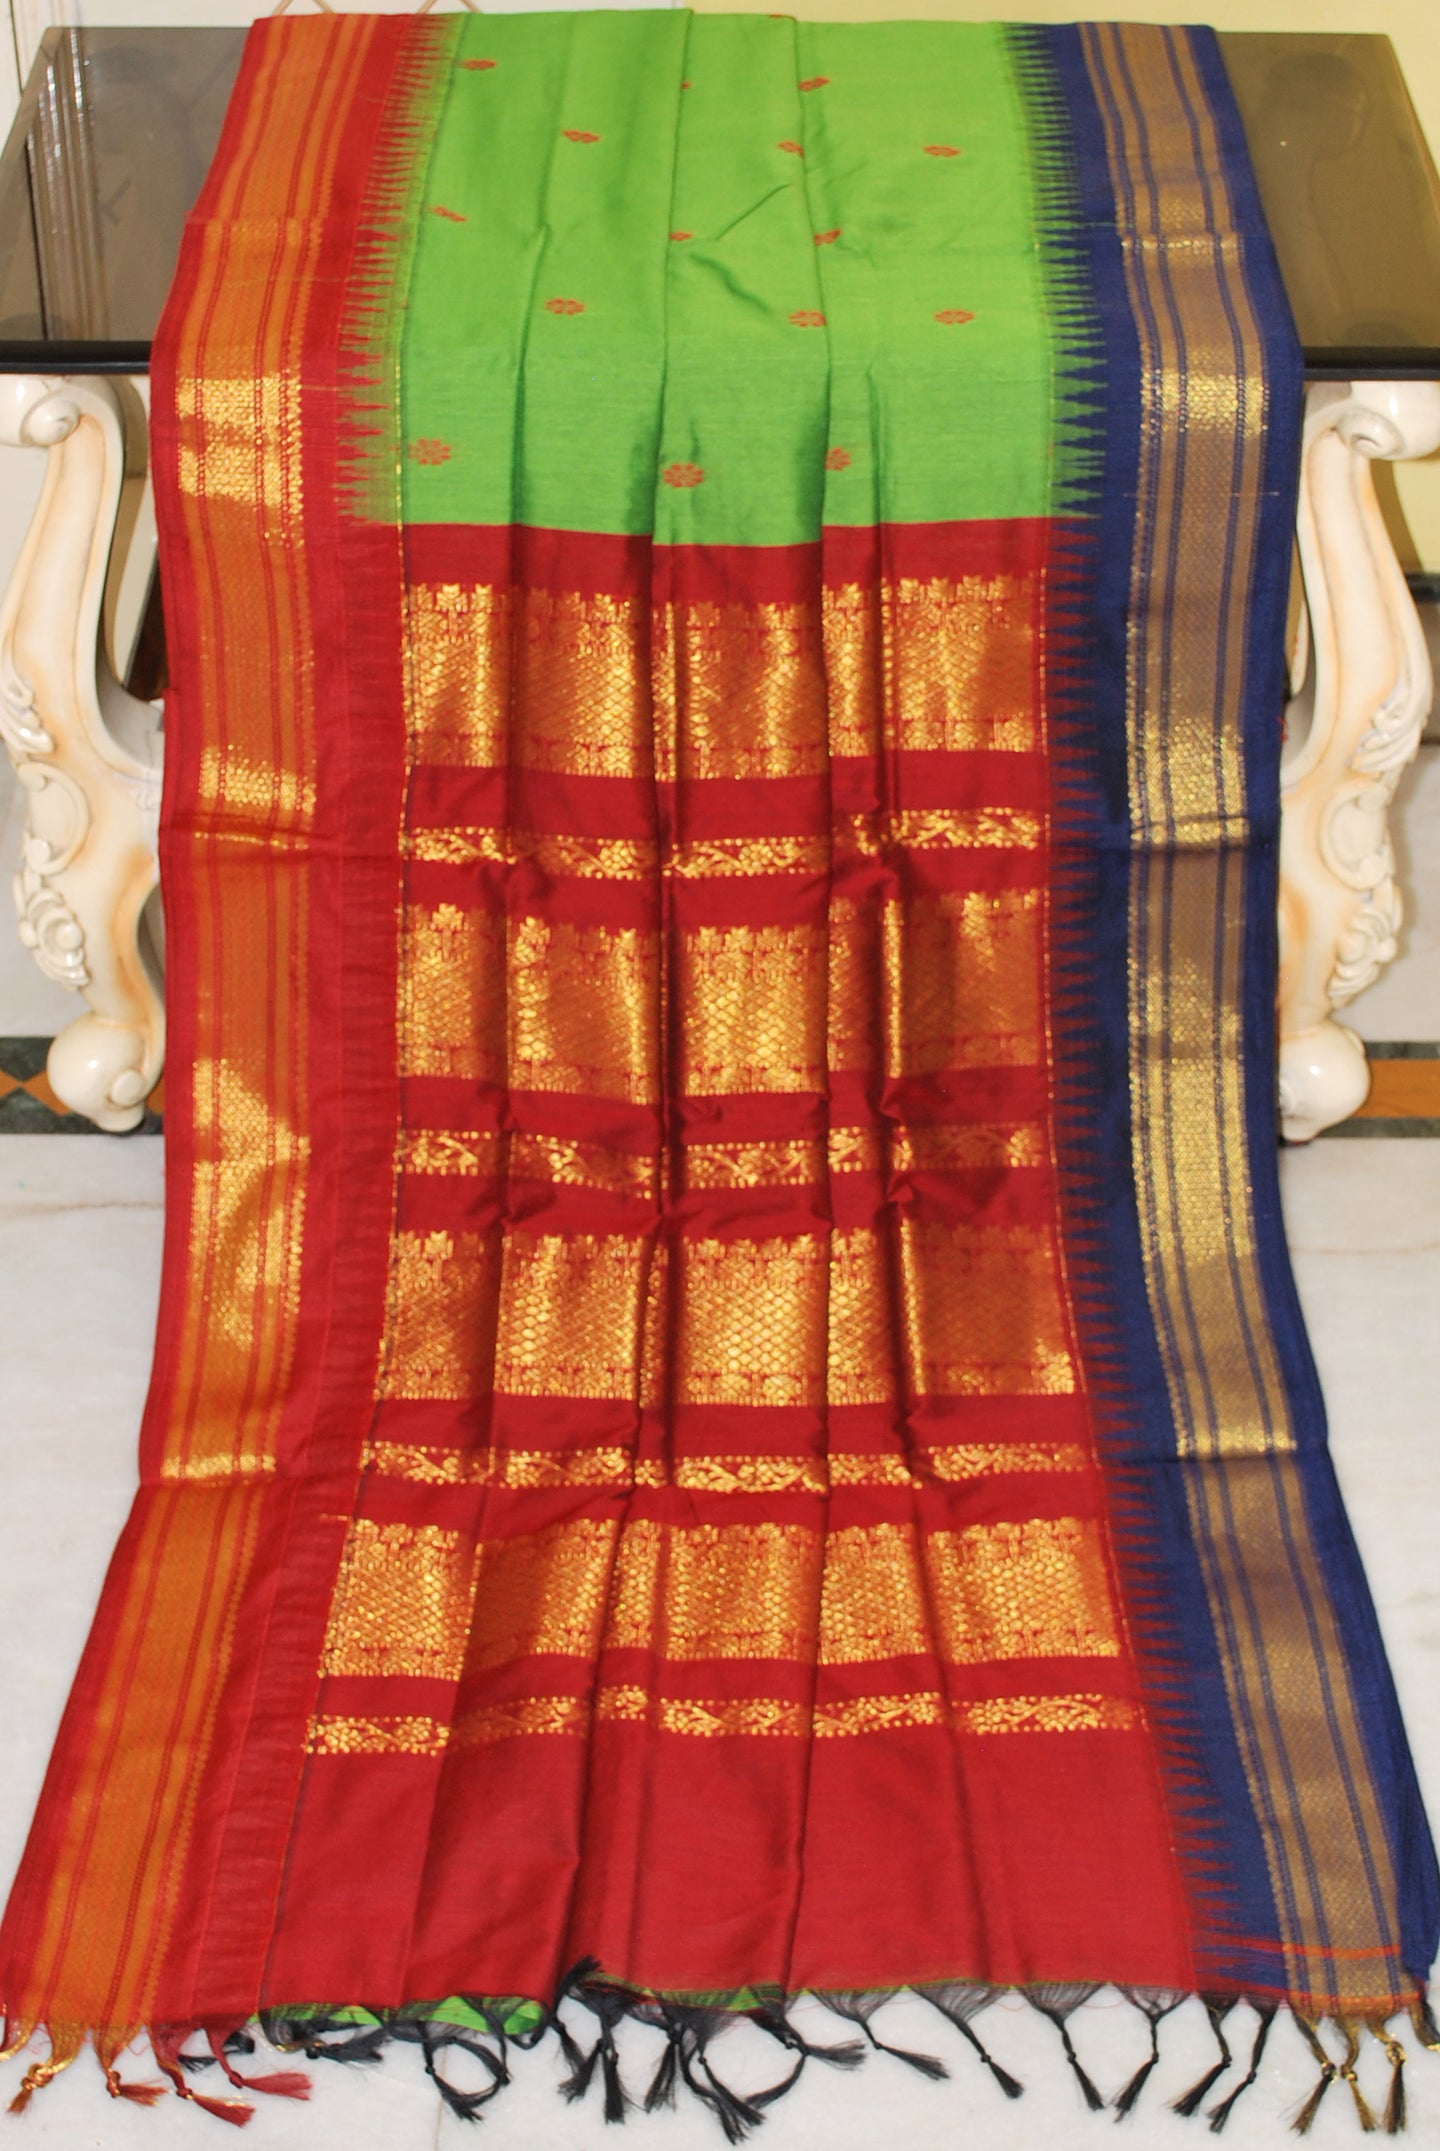 Crowned Temple Ganga Jamuna Border Cotton Gadwal Saree with Rich Pallu in Bright Green, Dark Red and Navy Blue